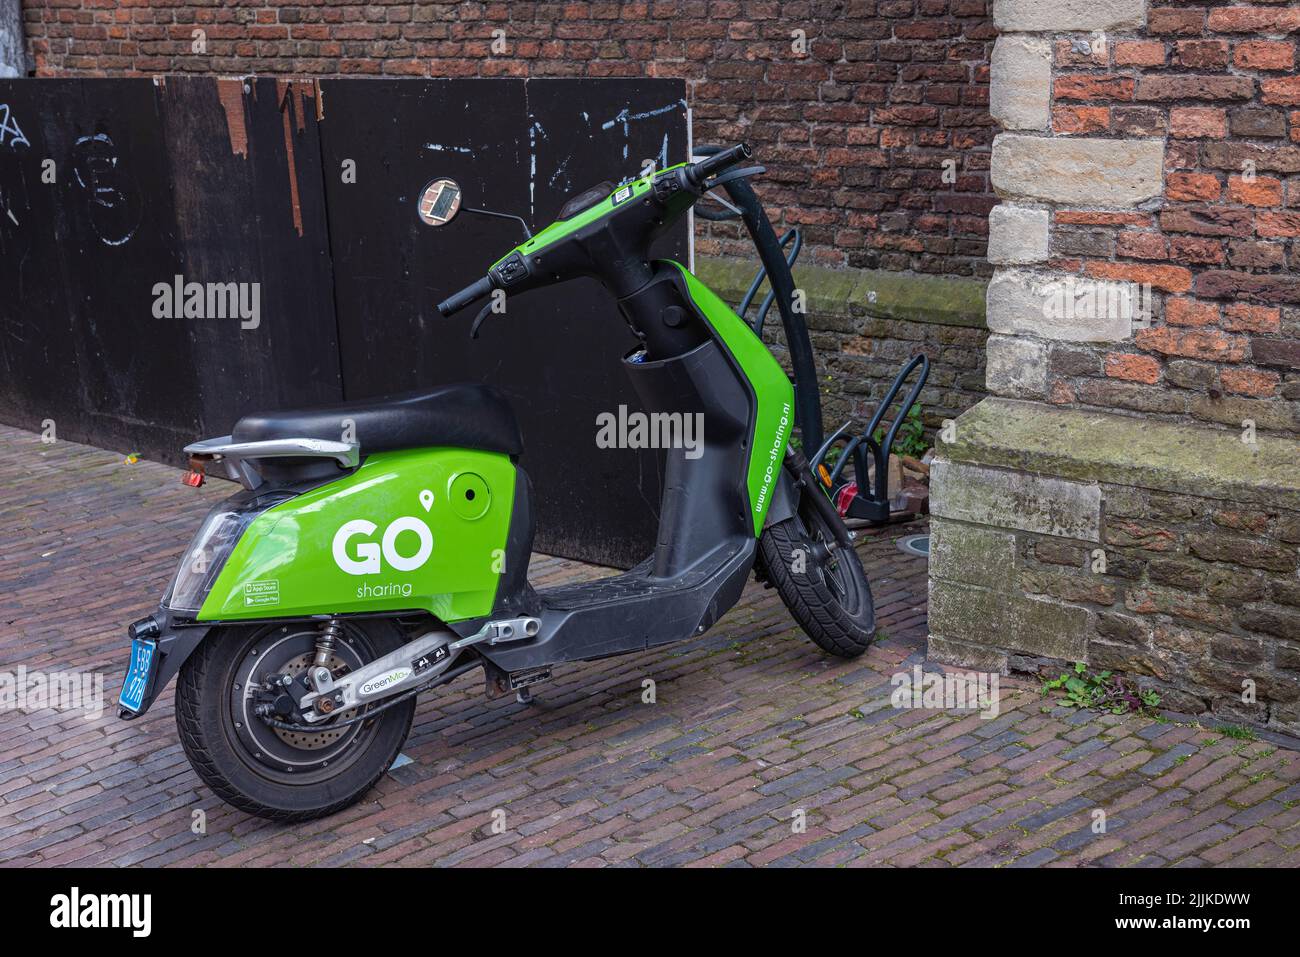 Parked green go sharing scooter in Haarlem, the Netherlands. There are no people in the shot. Stock Photo